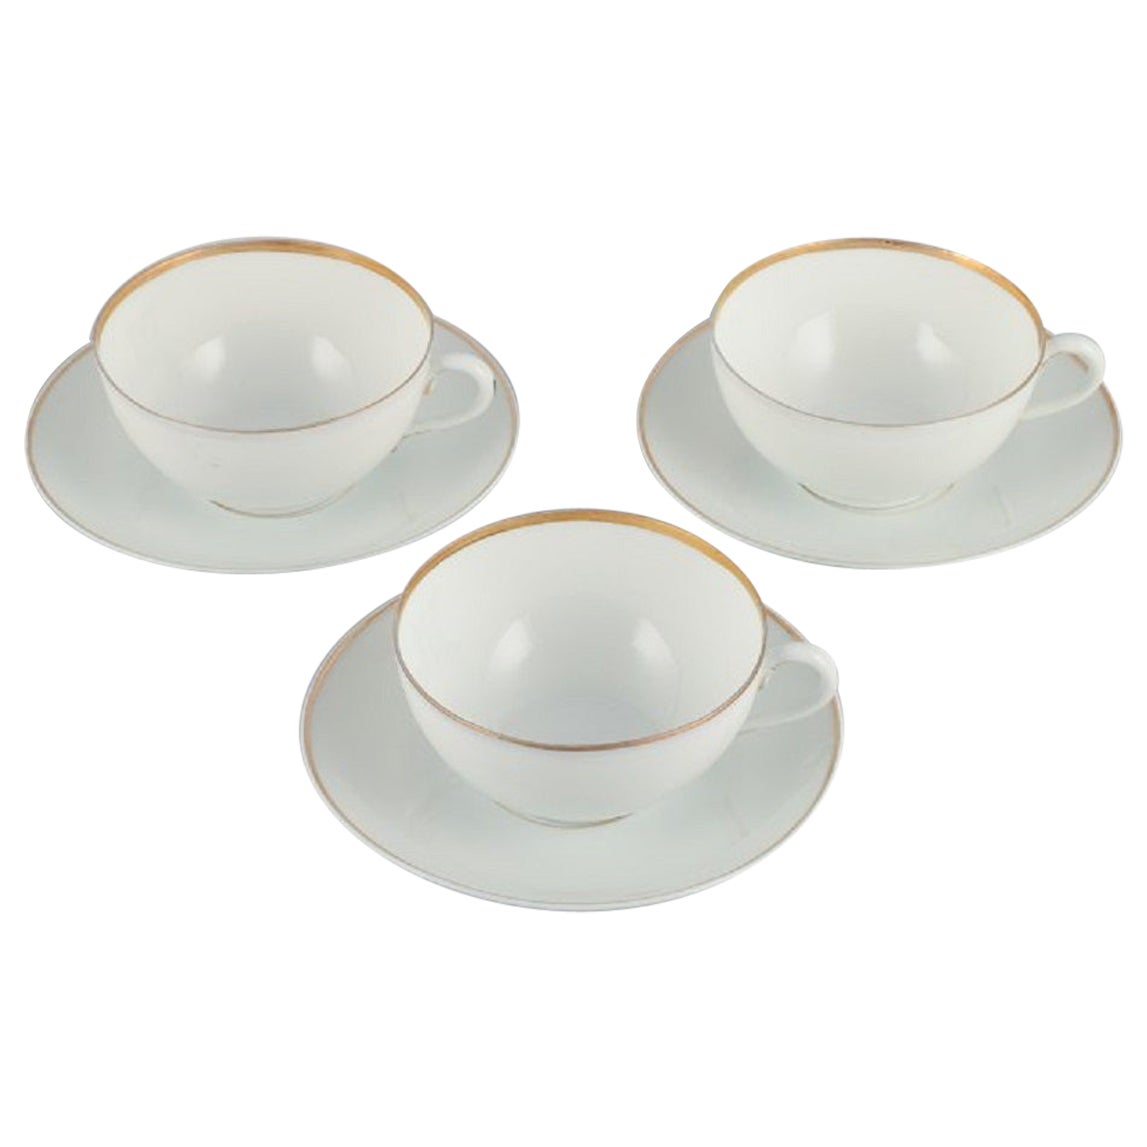 Rosenthal, Germany, Set of Three Large Teacups and Matching Porcelain Saucers For Sale